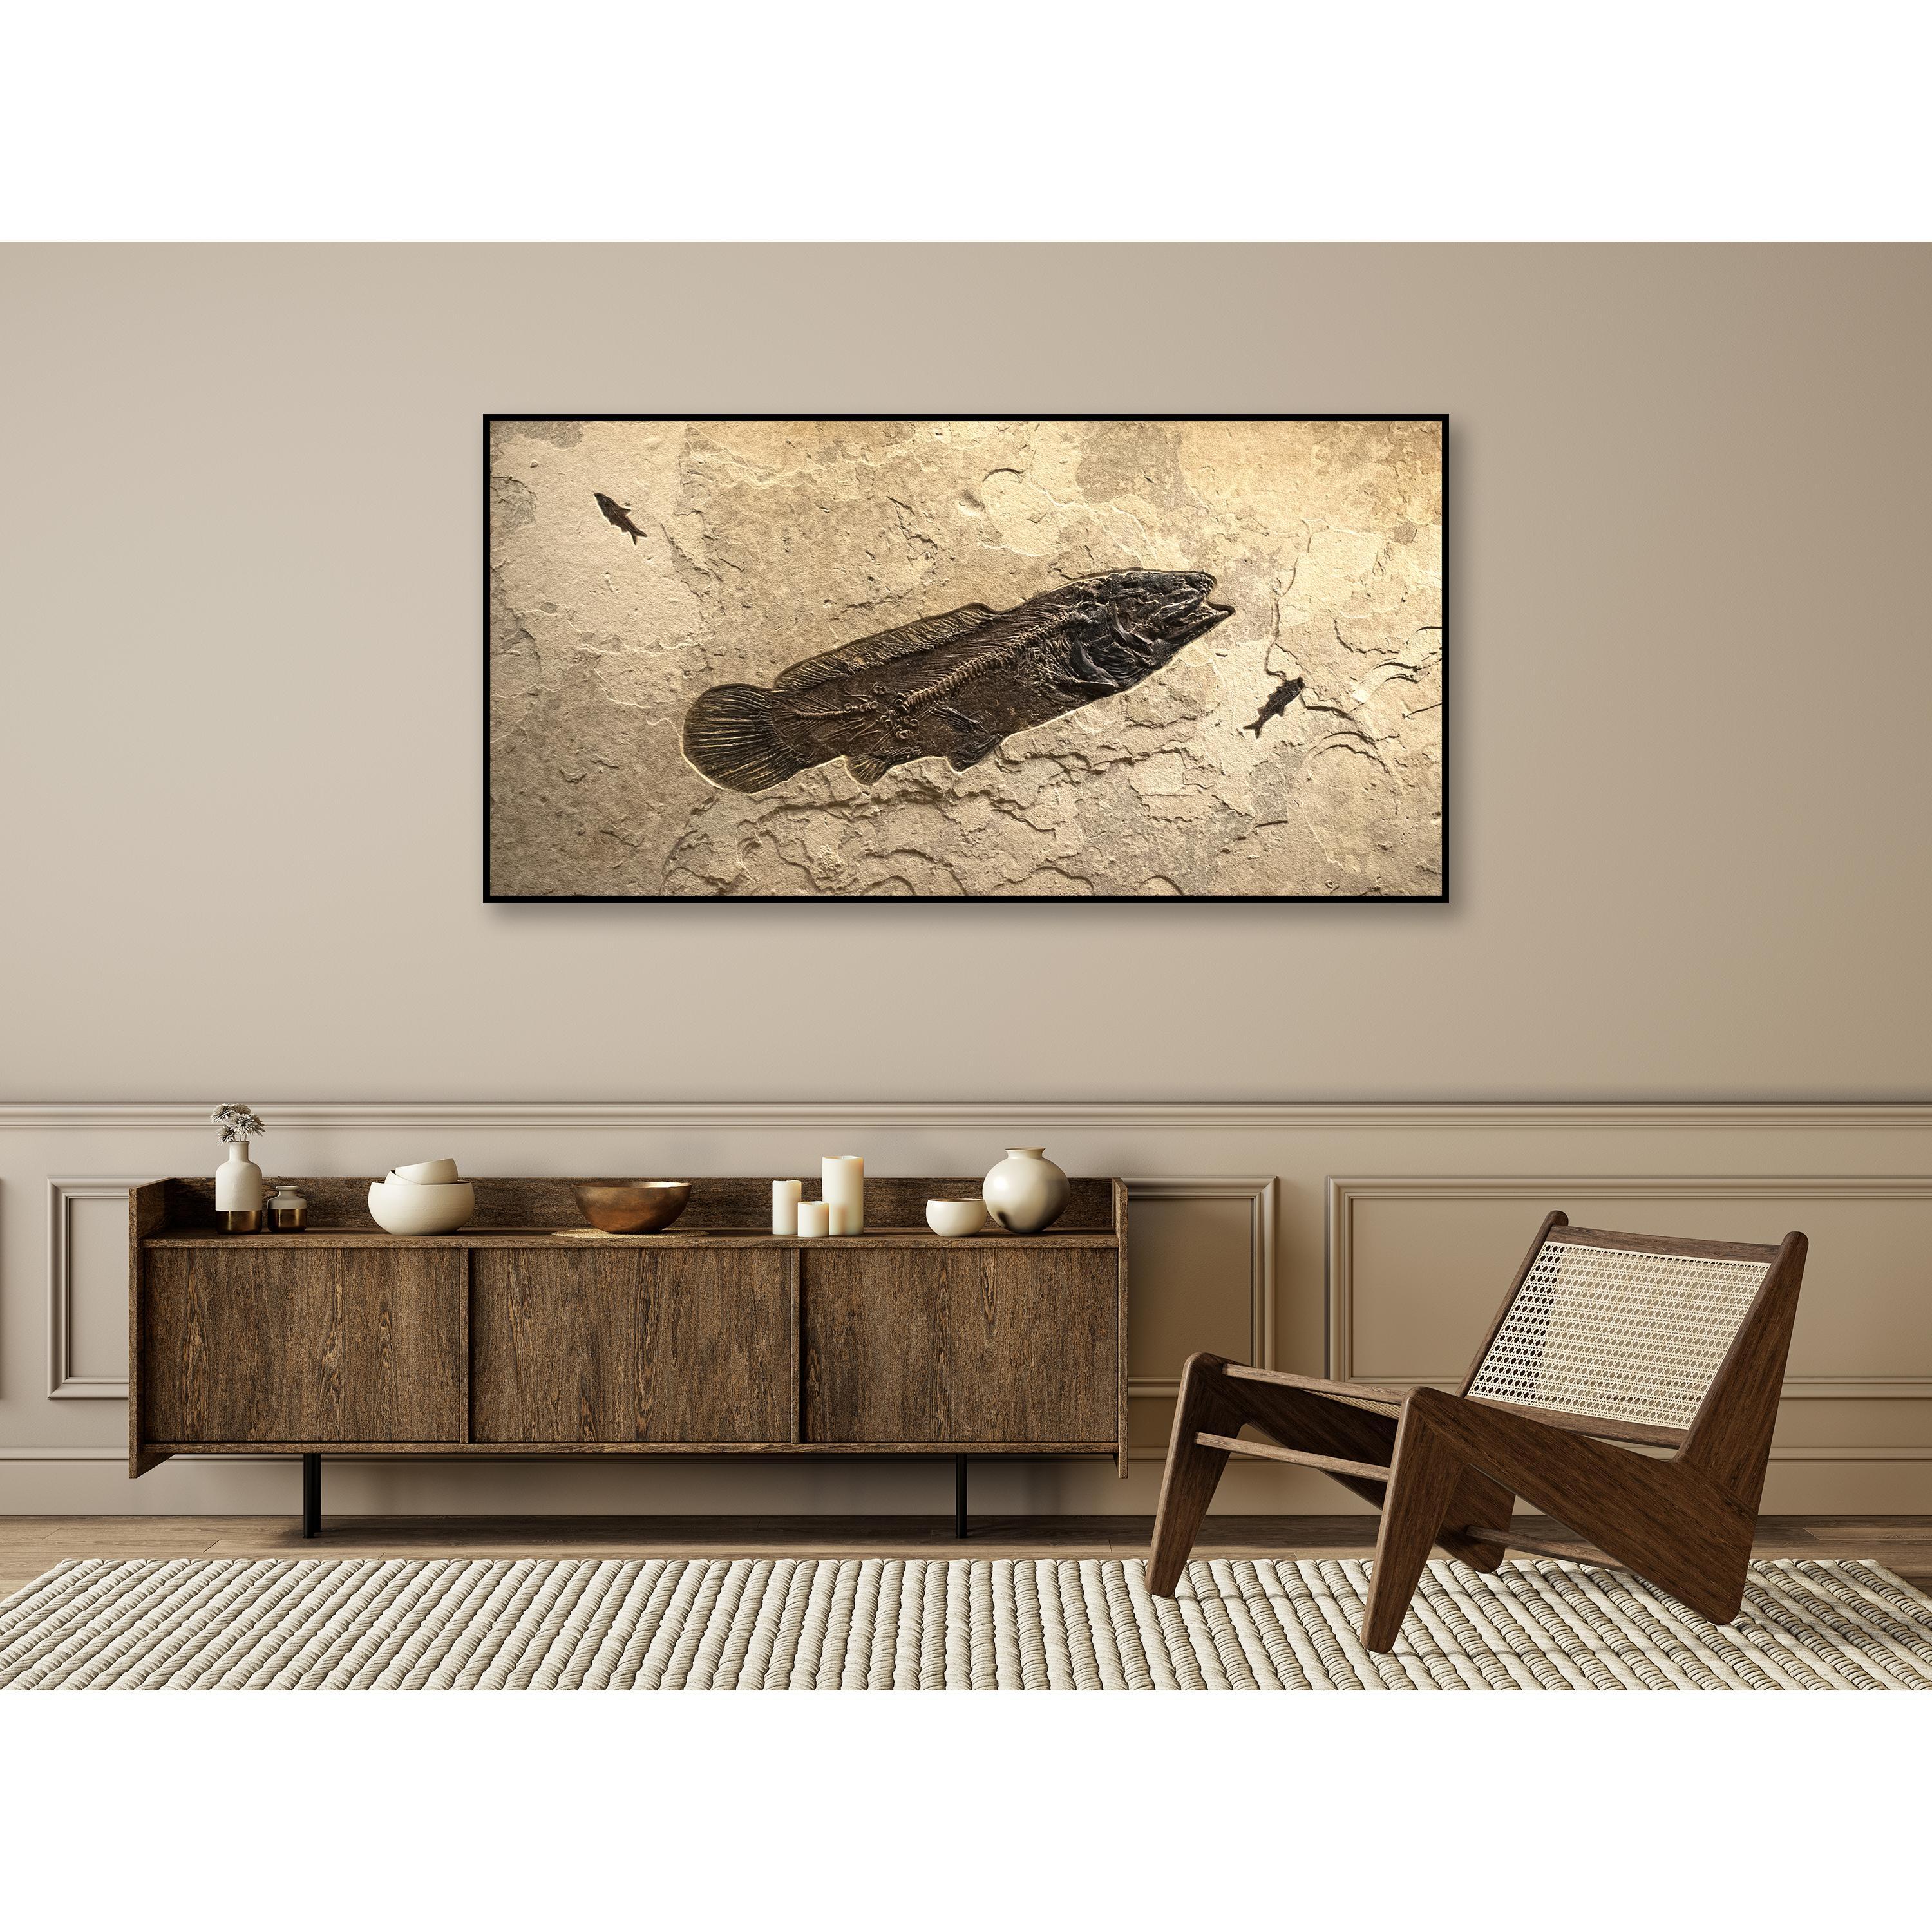 This fossil mural features an Amia pattersoni, an exceptionally rare Eocene era fossil fish dating back about 50 million years. This ancient bowfin has a remarkable degree of preservation, showcasing highly detailed scale pattern above the vertebral